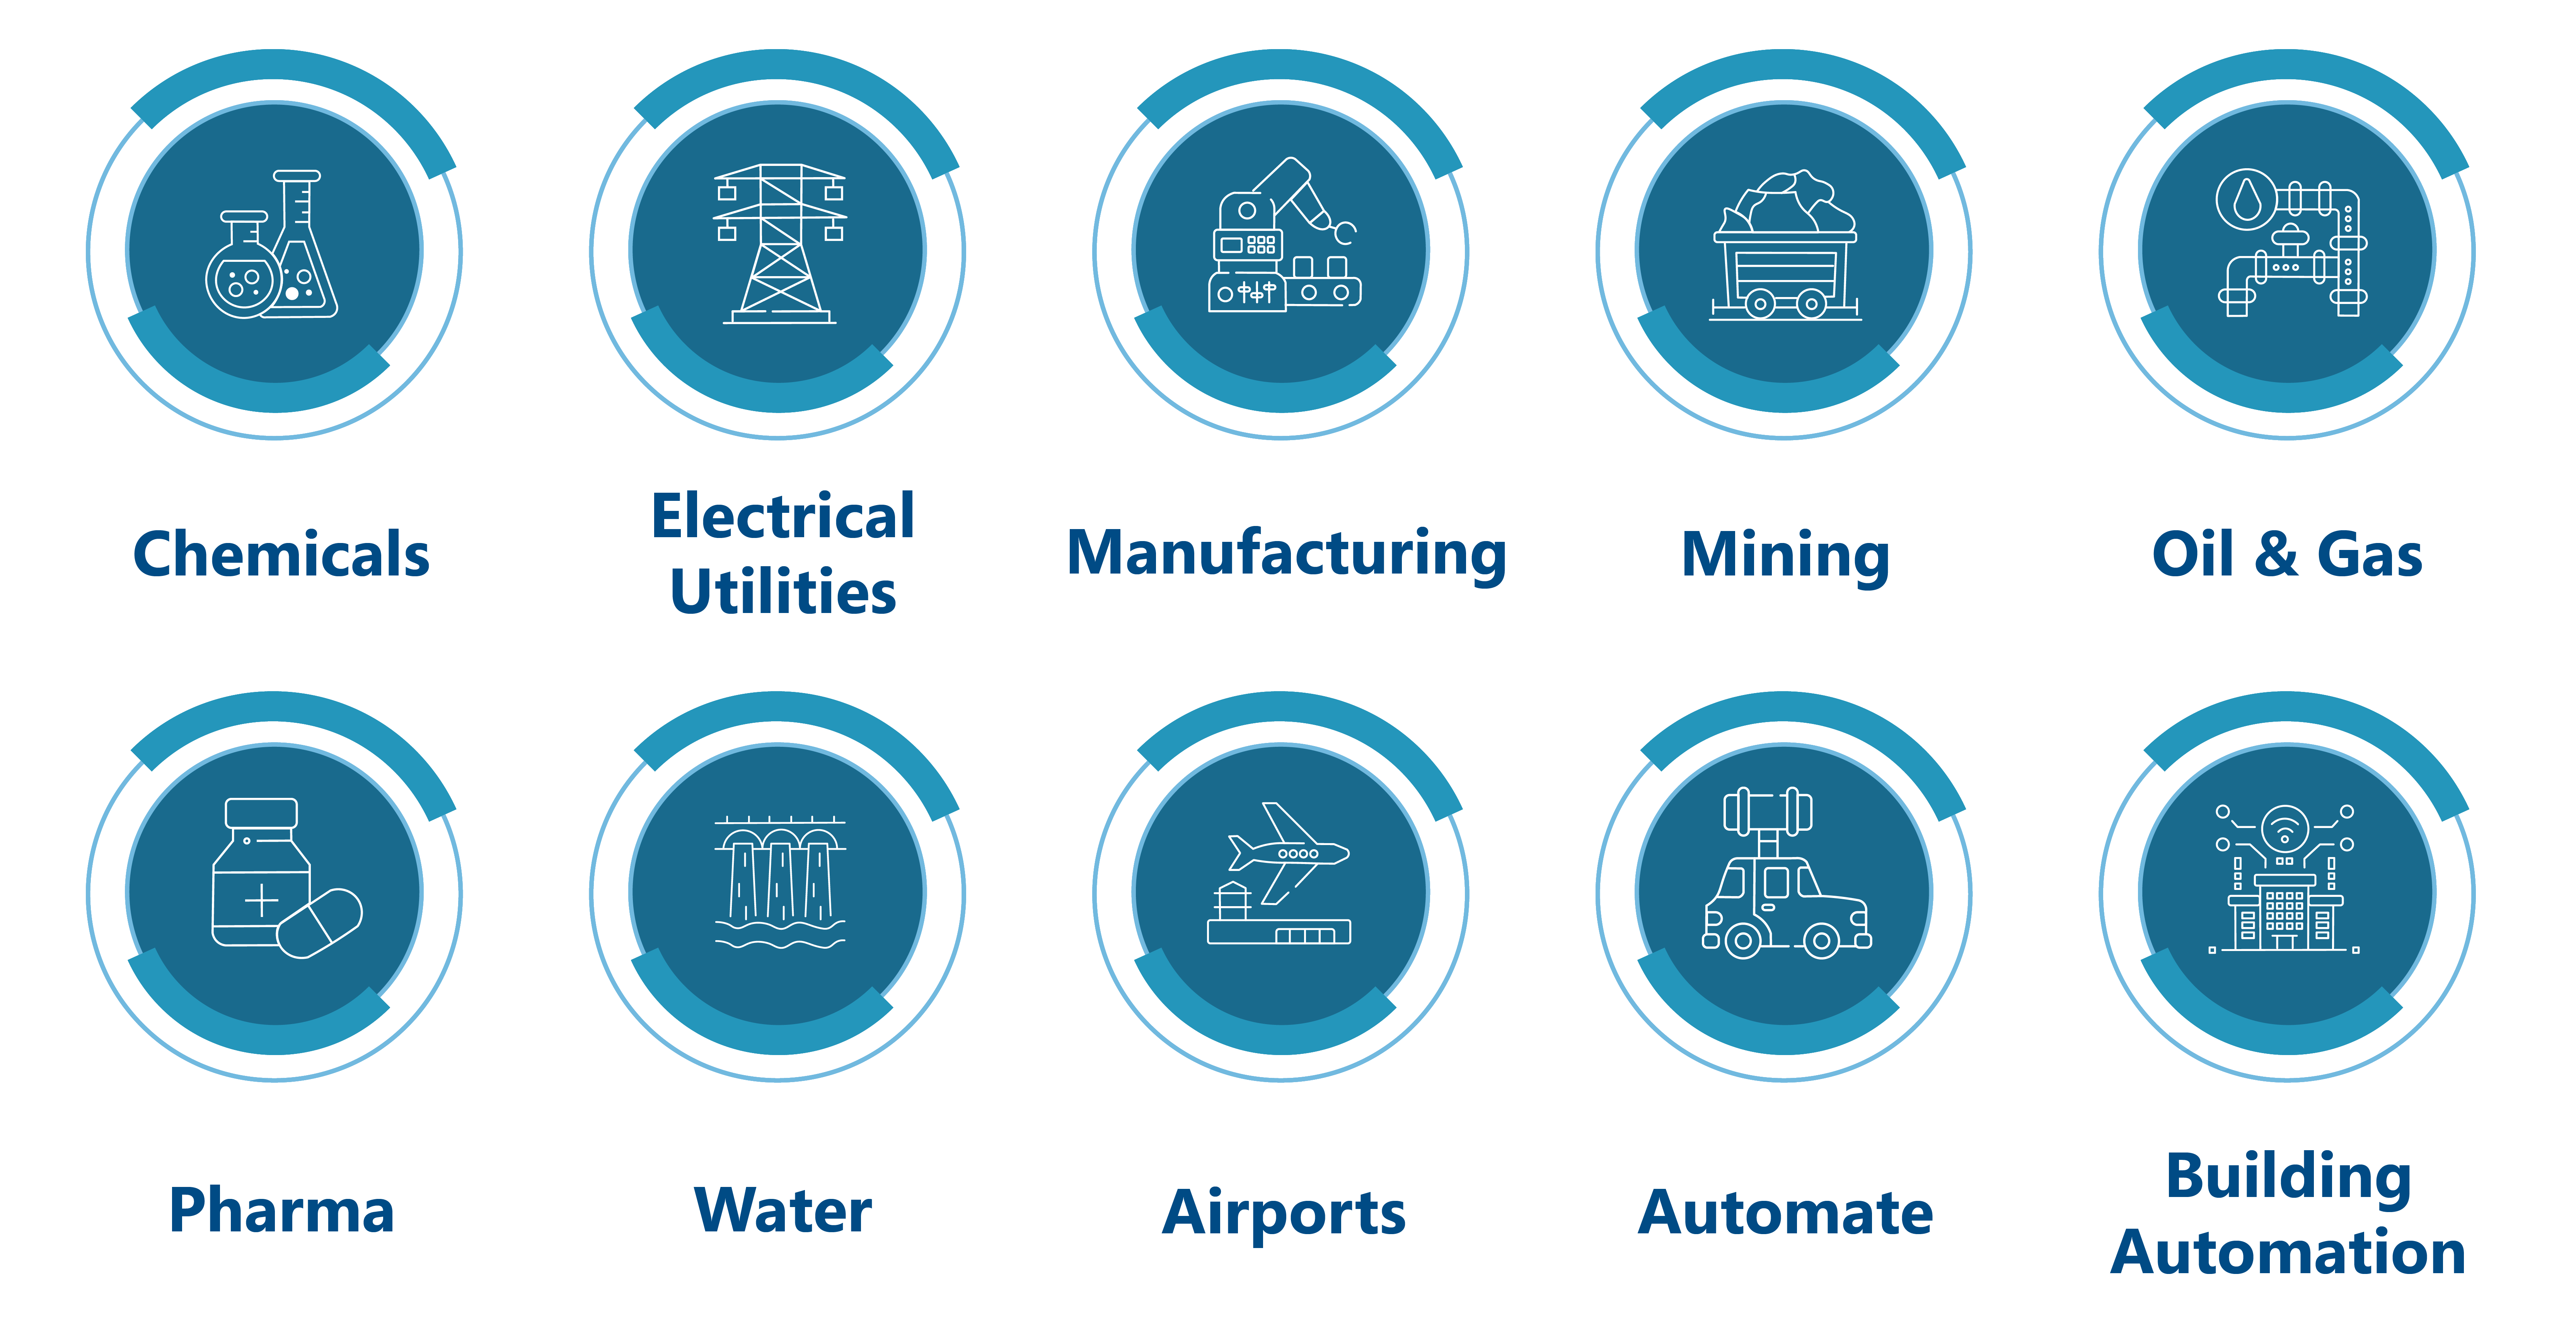 Asset Automation Industrial Internet of Things